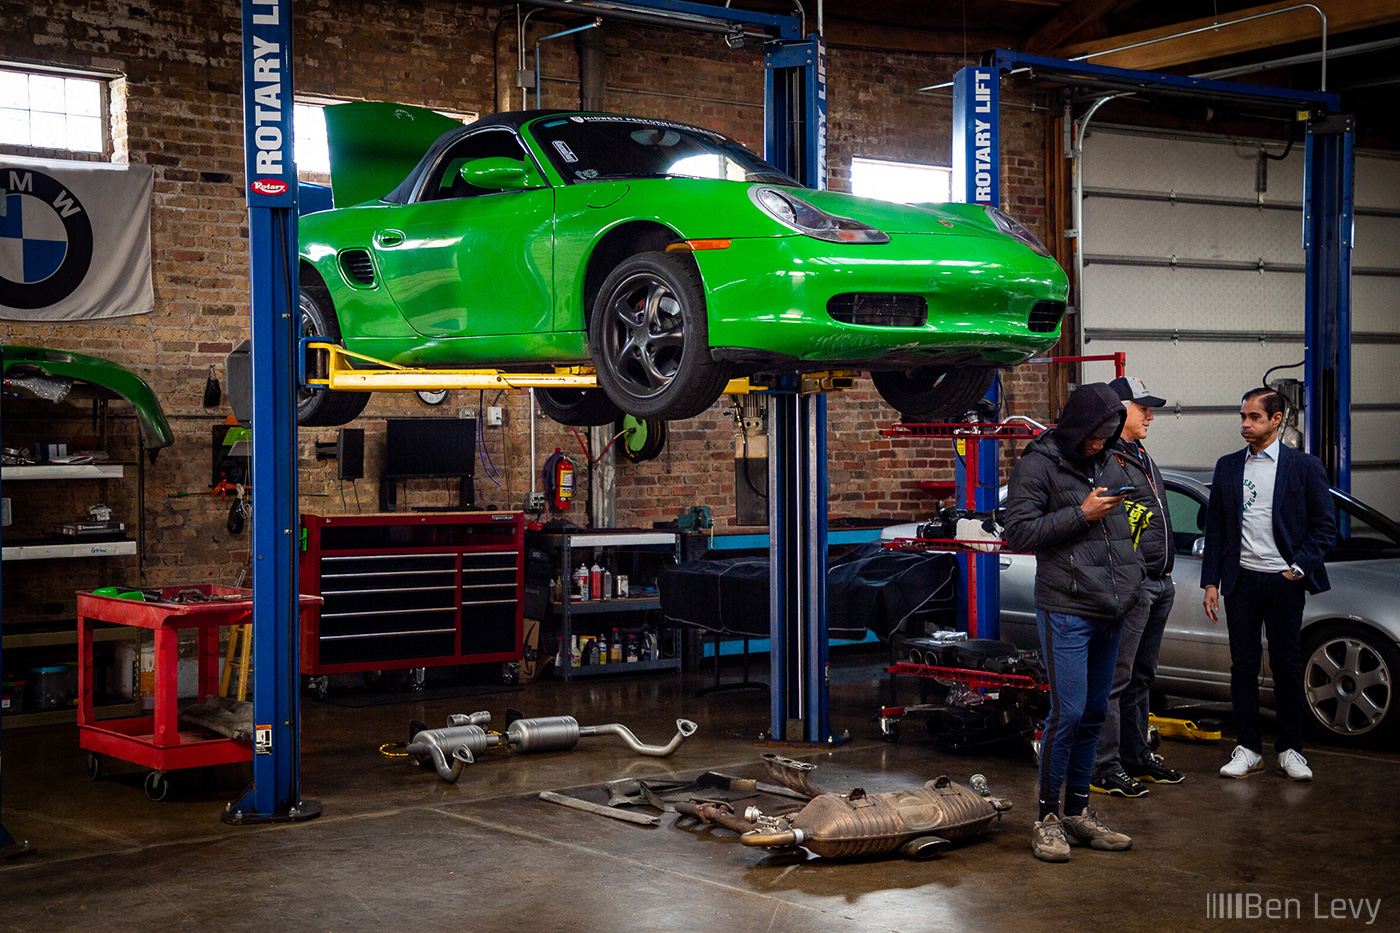 The Midwest Performance Cars Porsche Boxter on the Lift